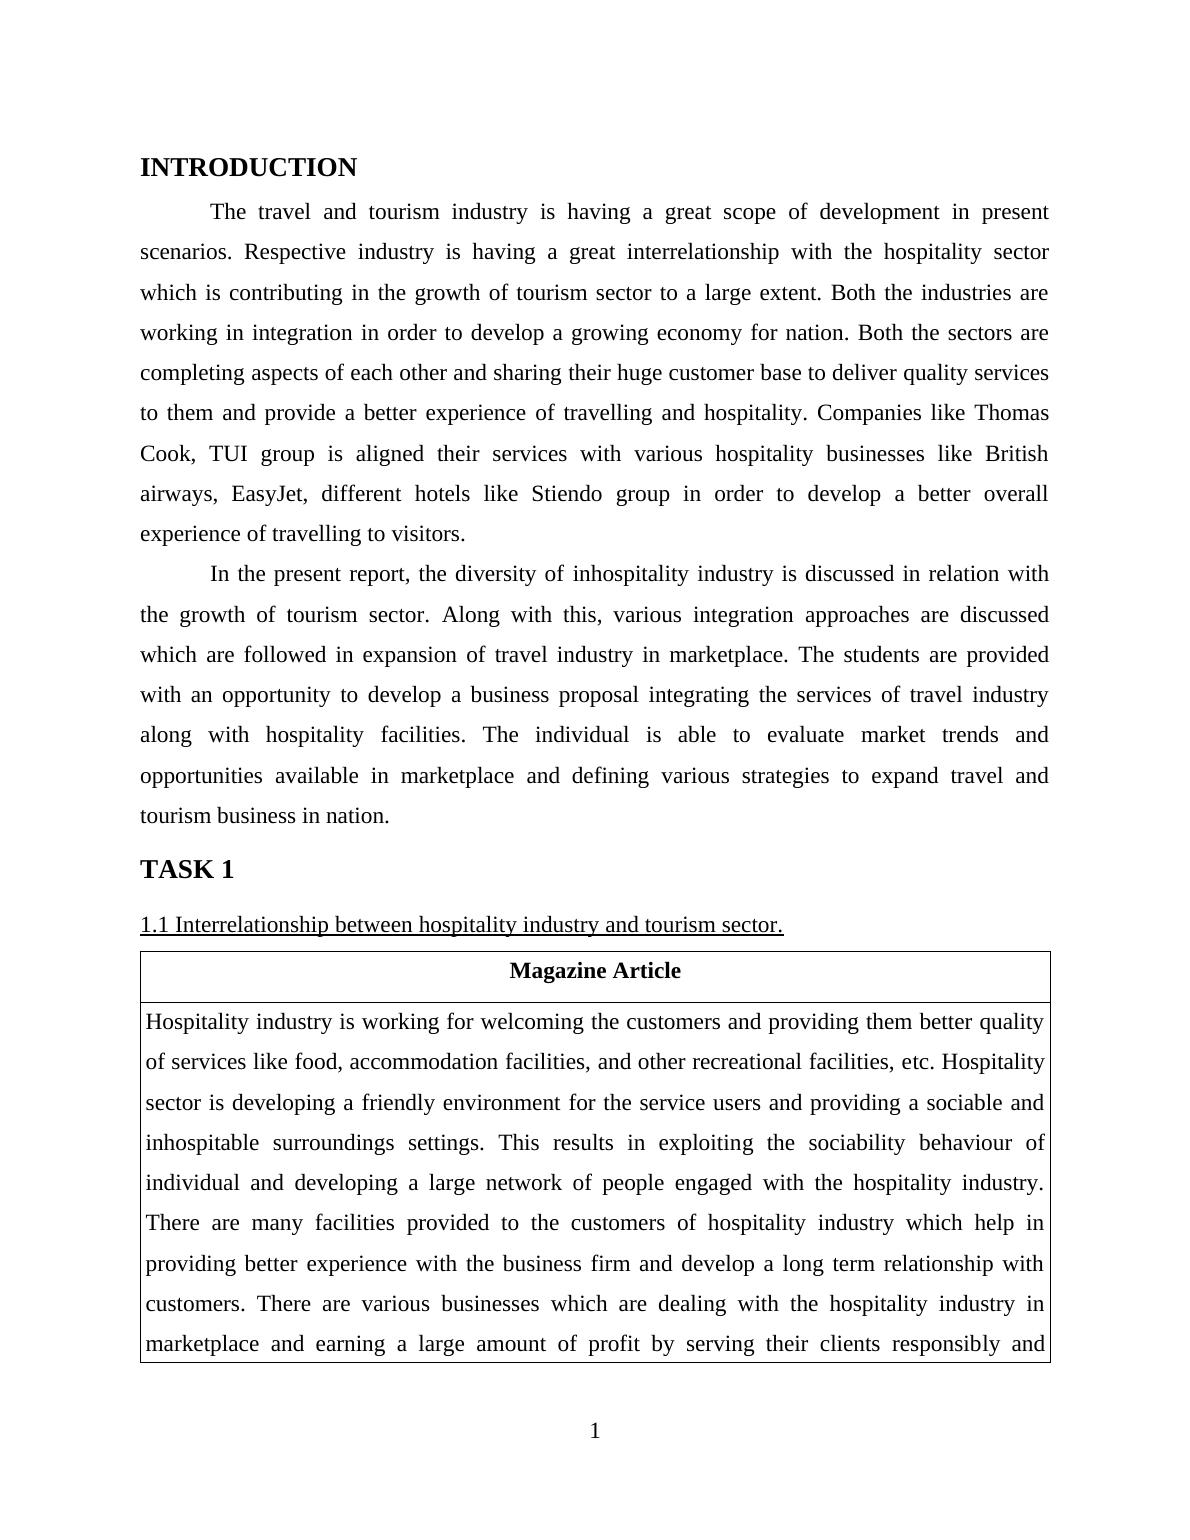 Research on Hospitality Provision - TUI Group_3